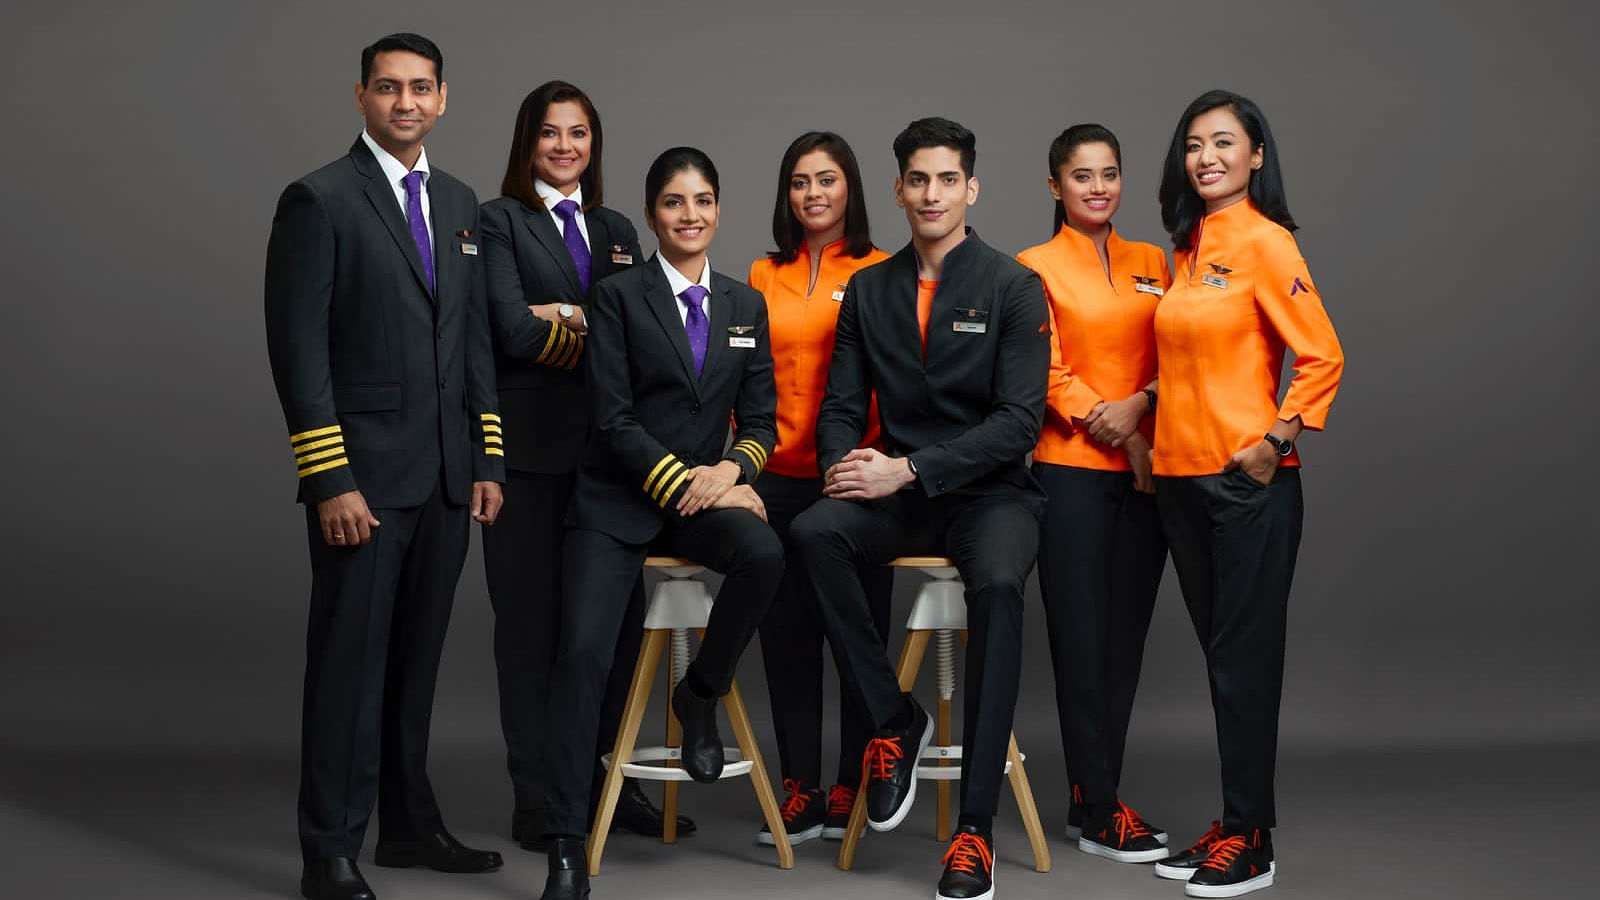 The company said it is the first Indian airline to have introduced custom trousers and jackets, with their fabric specially made for Akasa Air (using recycled polyester fabric which is made from pet bottle plastic salvaged from marine waste) and comfortable sneakers for its airline in-flight crew keeping in mind ergonomics, aesthetics and comfort. Credit: Twitter/@AkasaAir